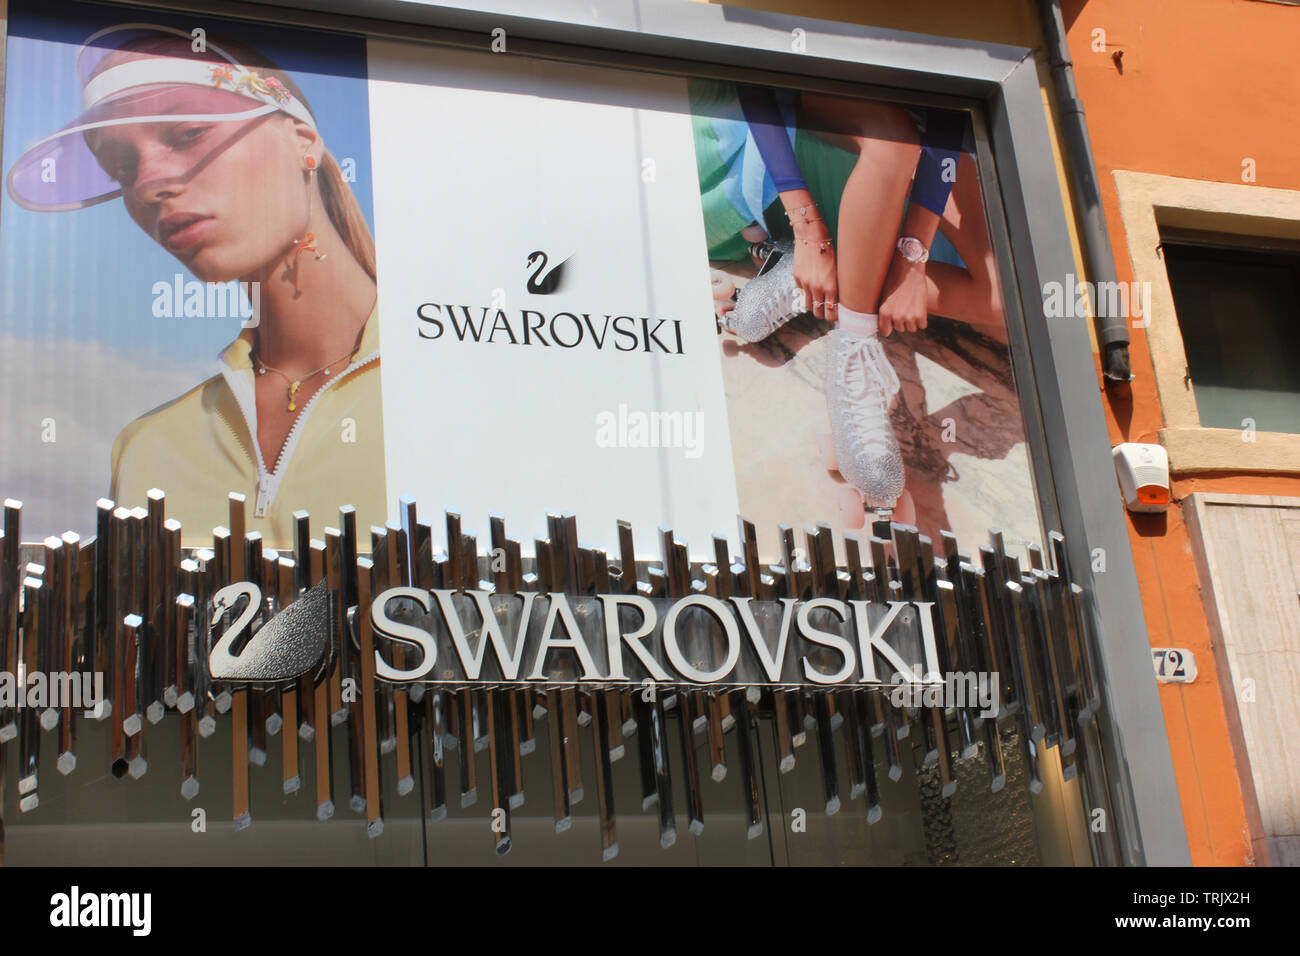 Swarovsky jewelry, store front, Verona. Larger than life-sized advertisement. Stock Photo